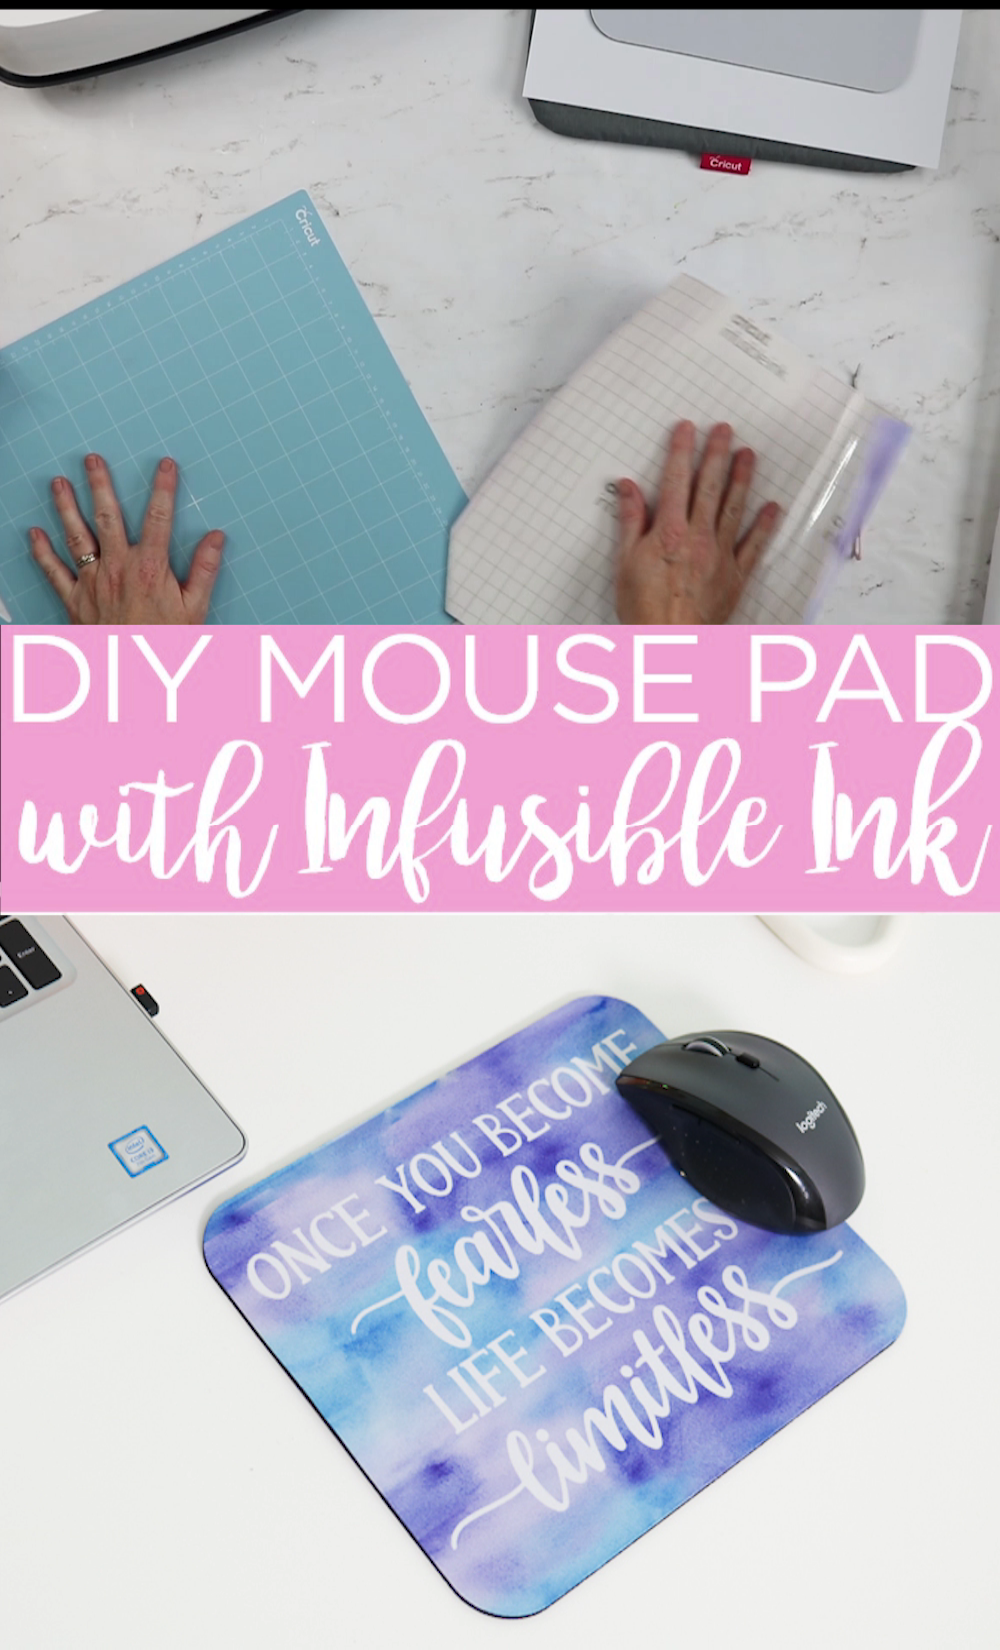 DIY Mouse Pad with Cricut Infusible Ink -   23 popular diy projects Videos ideas